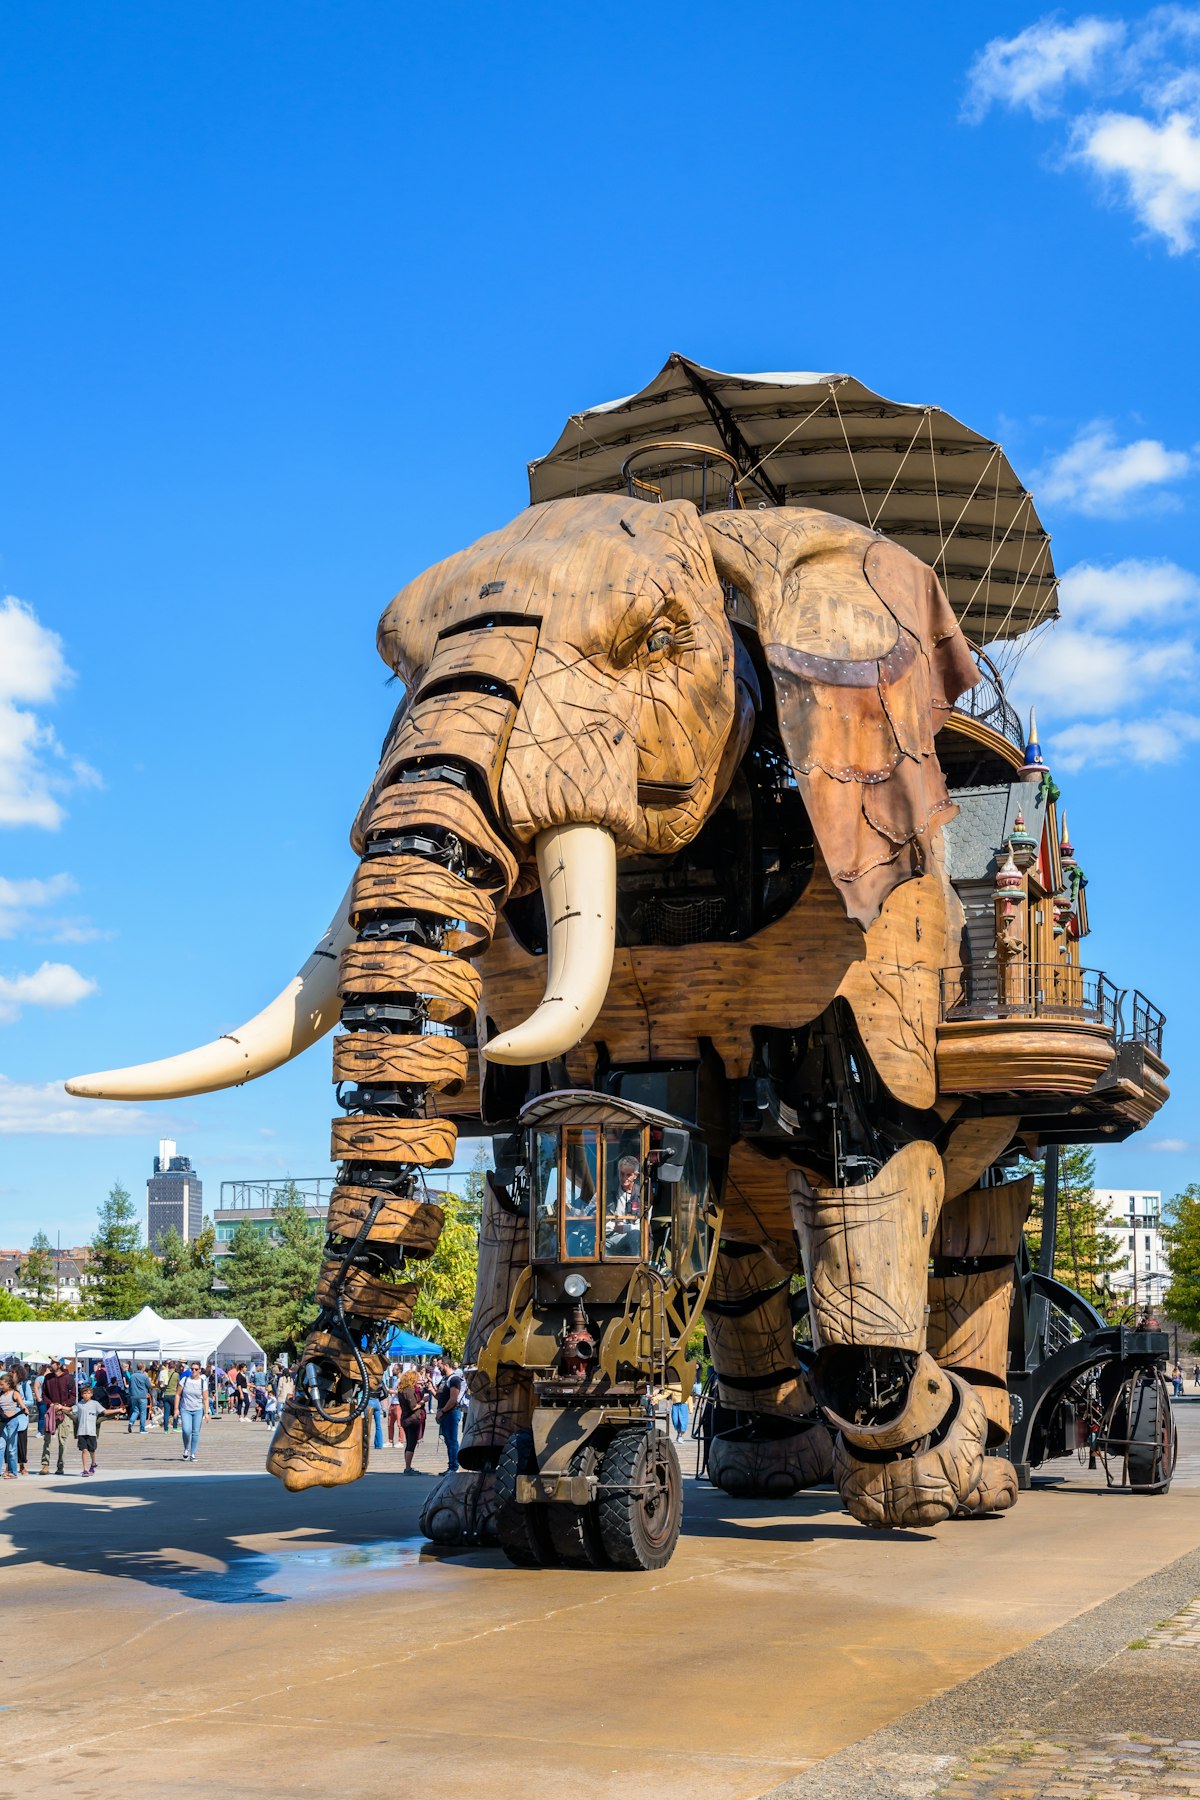 Nantes, France - September 17, 2022: The Great Elephant animated giant puppet, part of the Machines of the Isle of Nantes artistic and tourist attraction, wanders slowly amid onlookers on a sunny day.; Shutterstock ID 2220543875; your: Sloane Tucker; gl: 65050; netsuite: Online Editorial; full: POI
2220543875